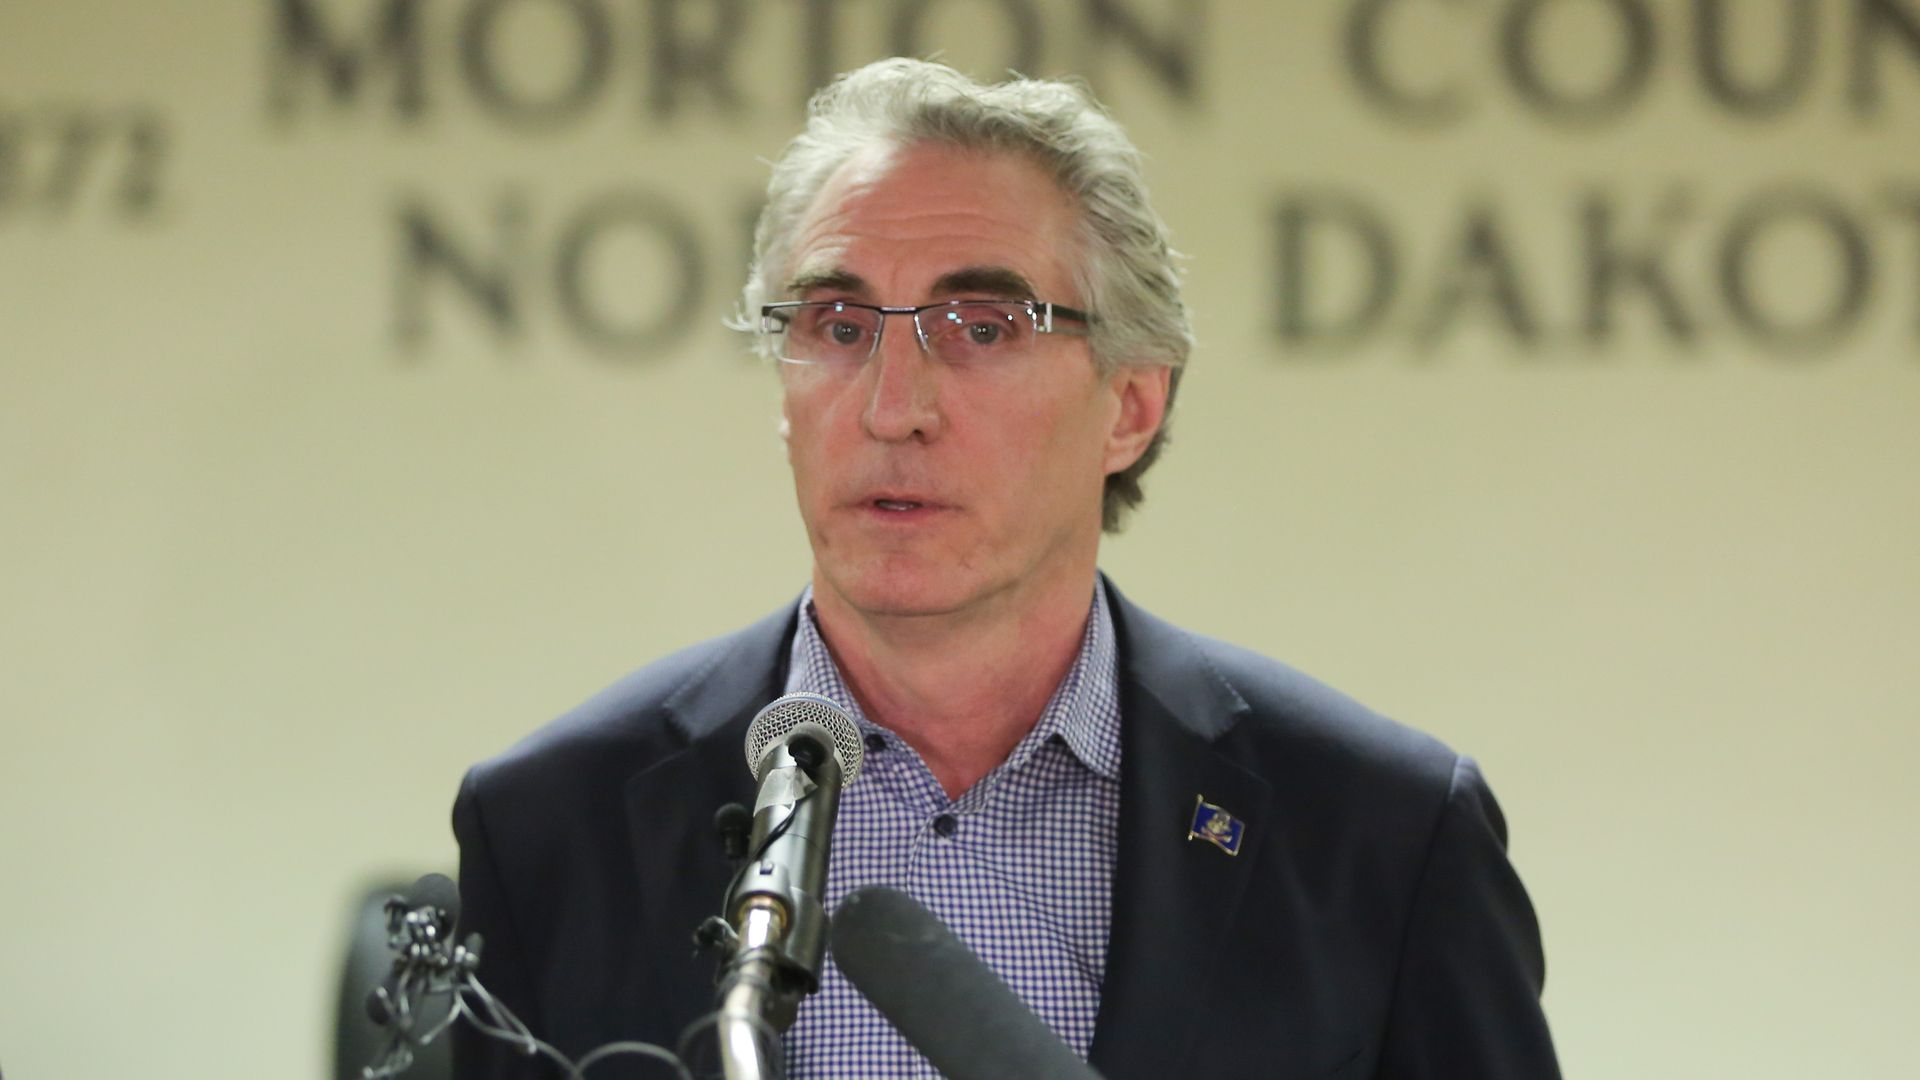 North Dakota Governor Doug Burgum speaks during a press conference announcing plans for the clean up of the Oceti Sakowin protest camp on February 22, 2017